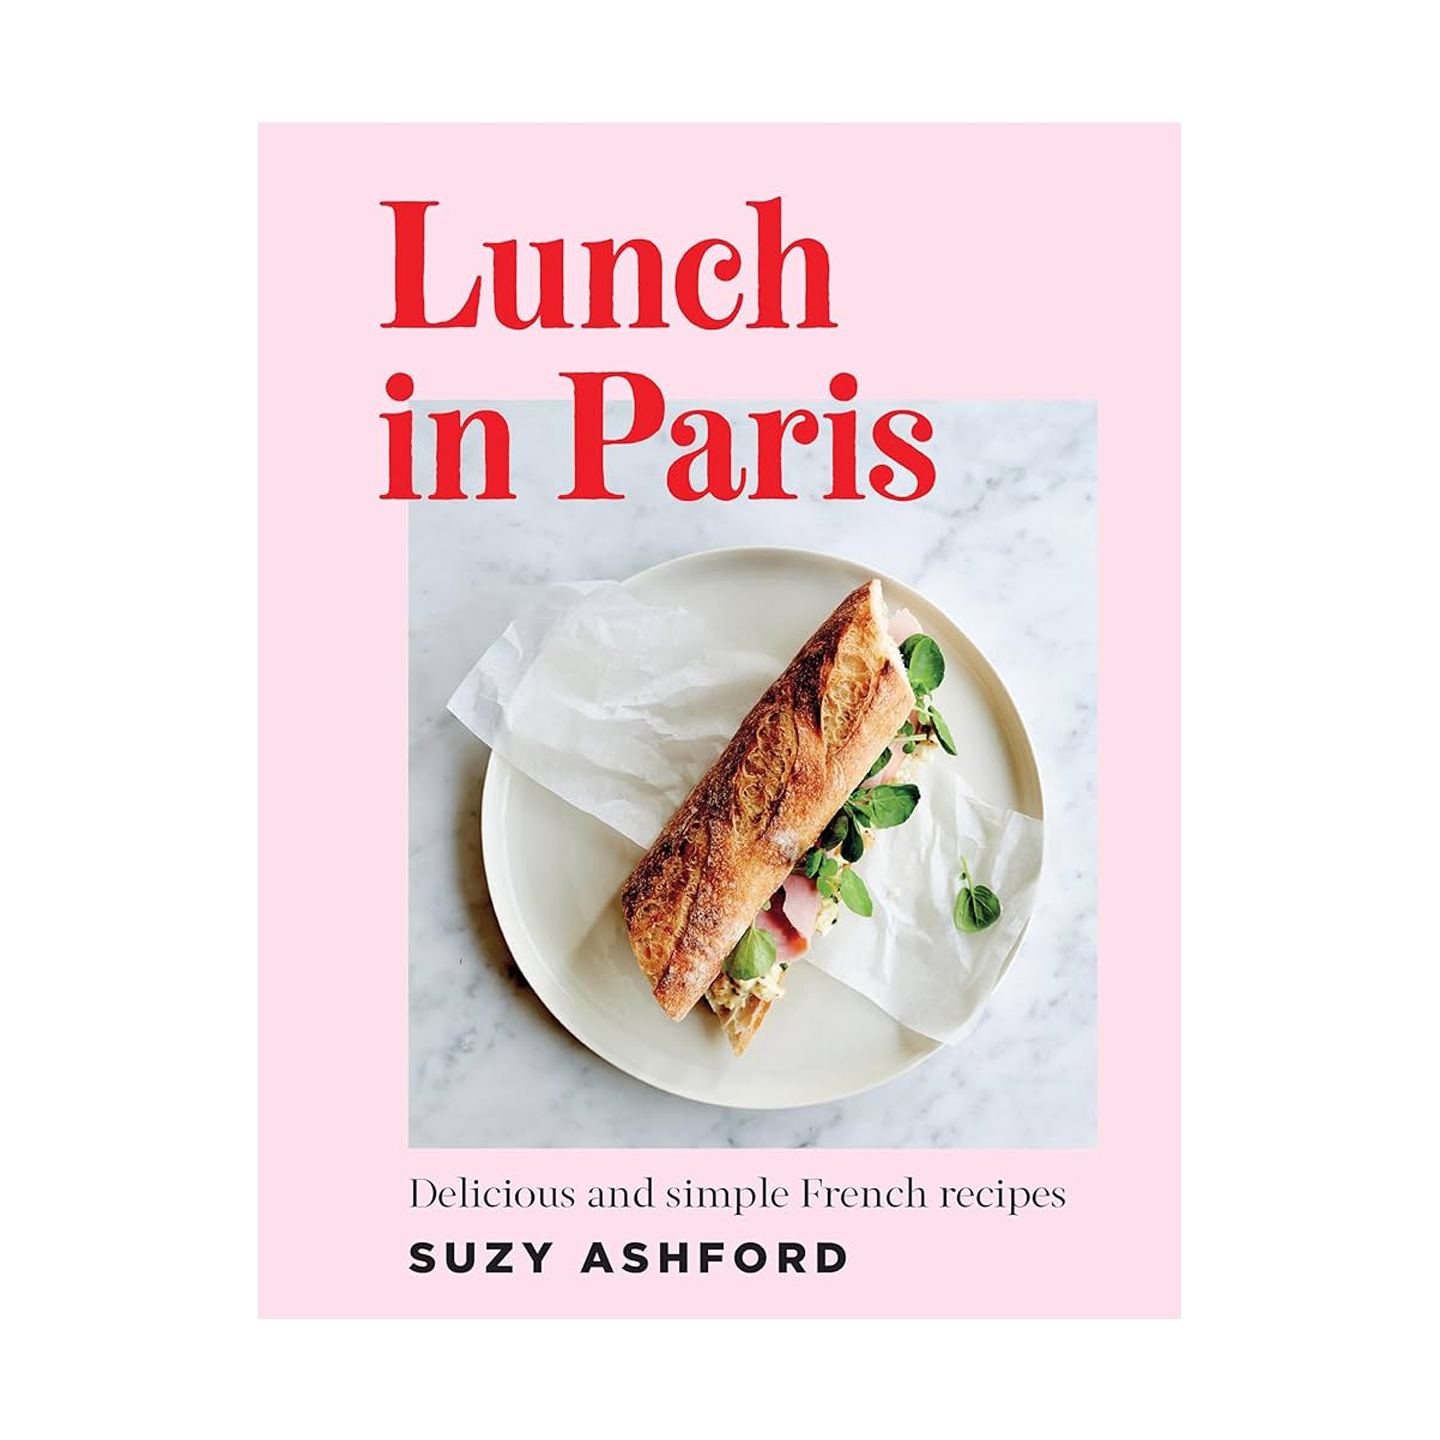 Lunch in Paris: Delicious and Simple French Recipes, PENGUIN RANDOM HOUSE LLC - RSVP Style